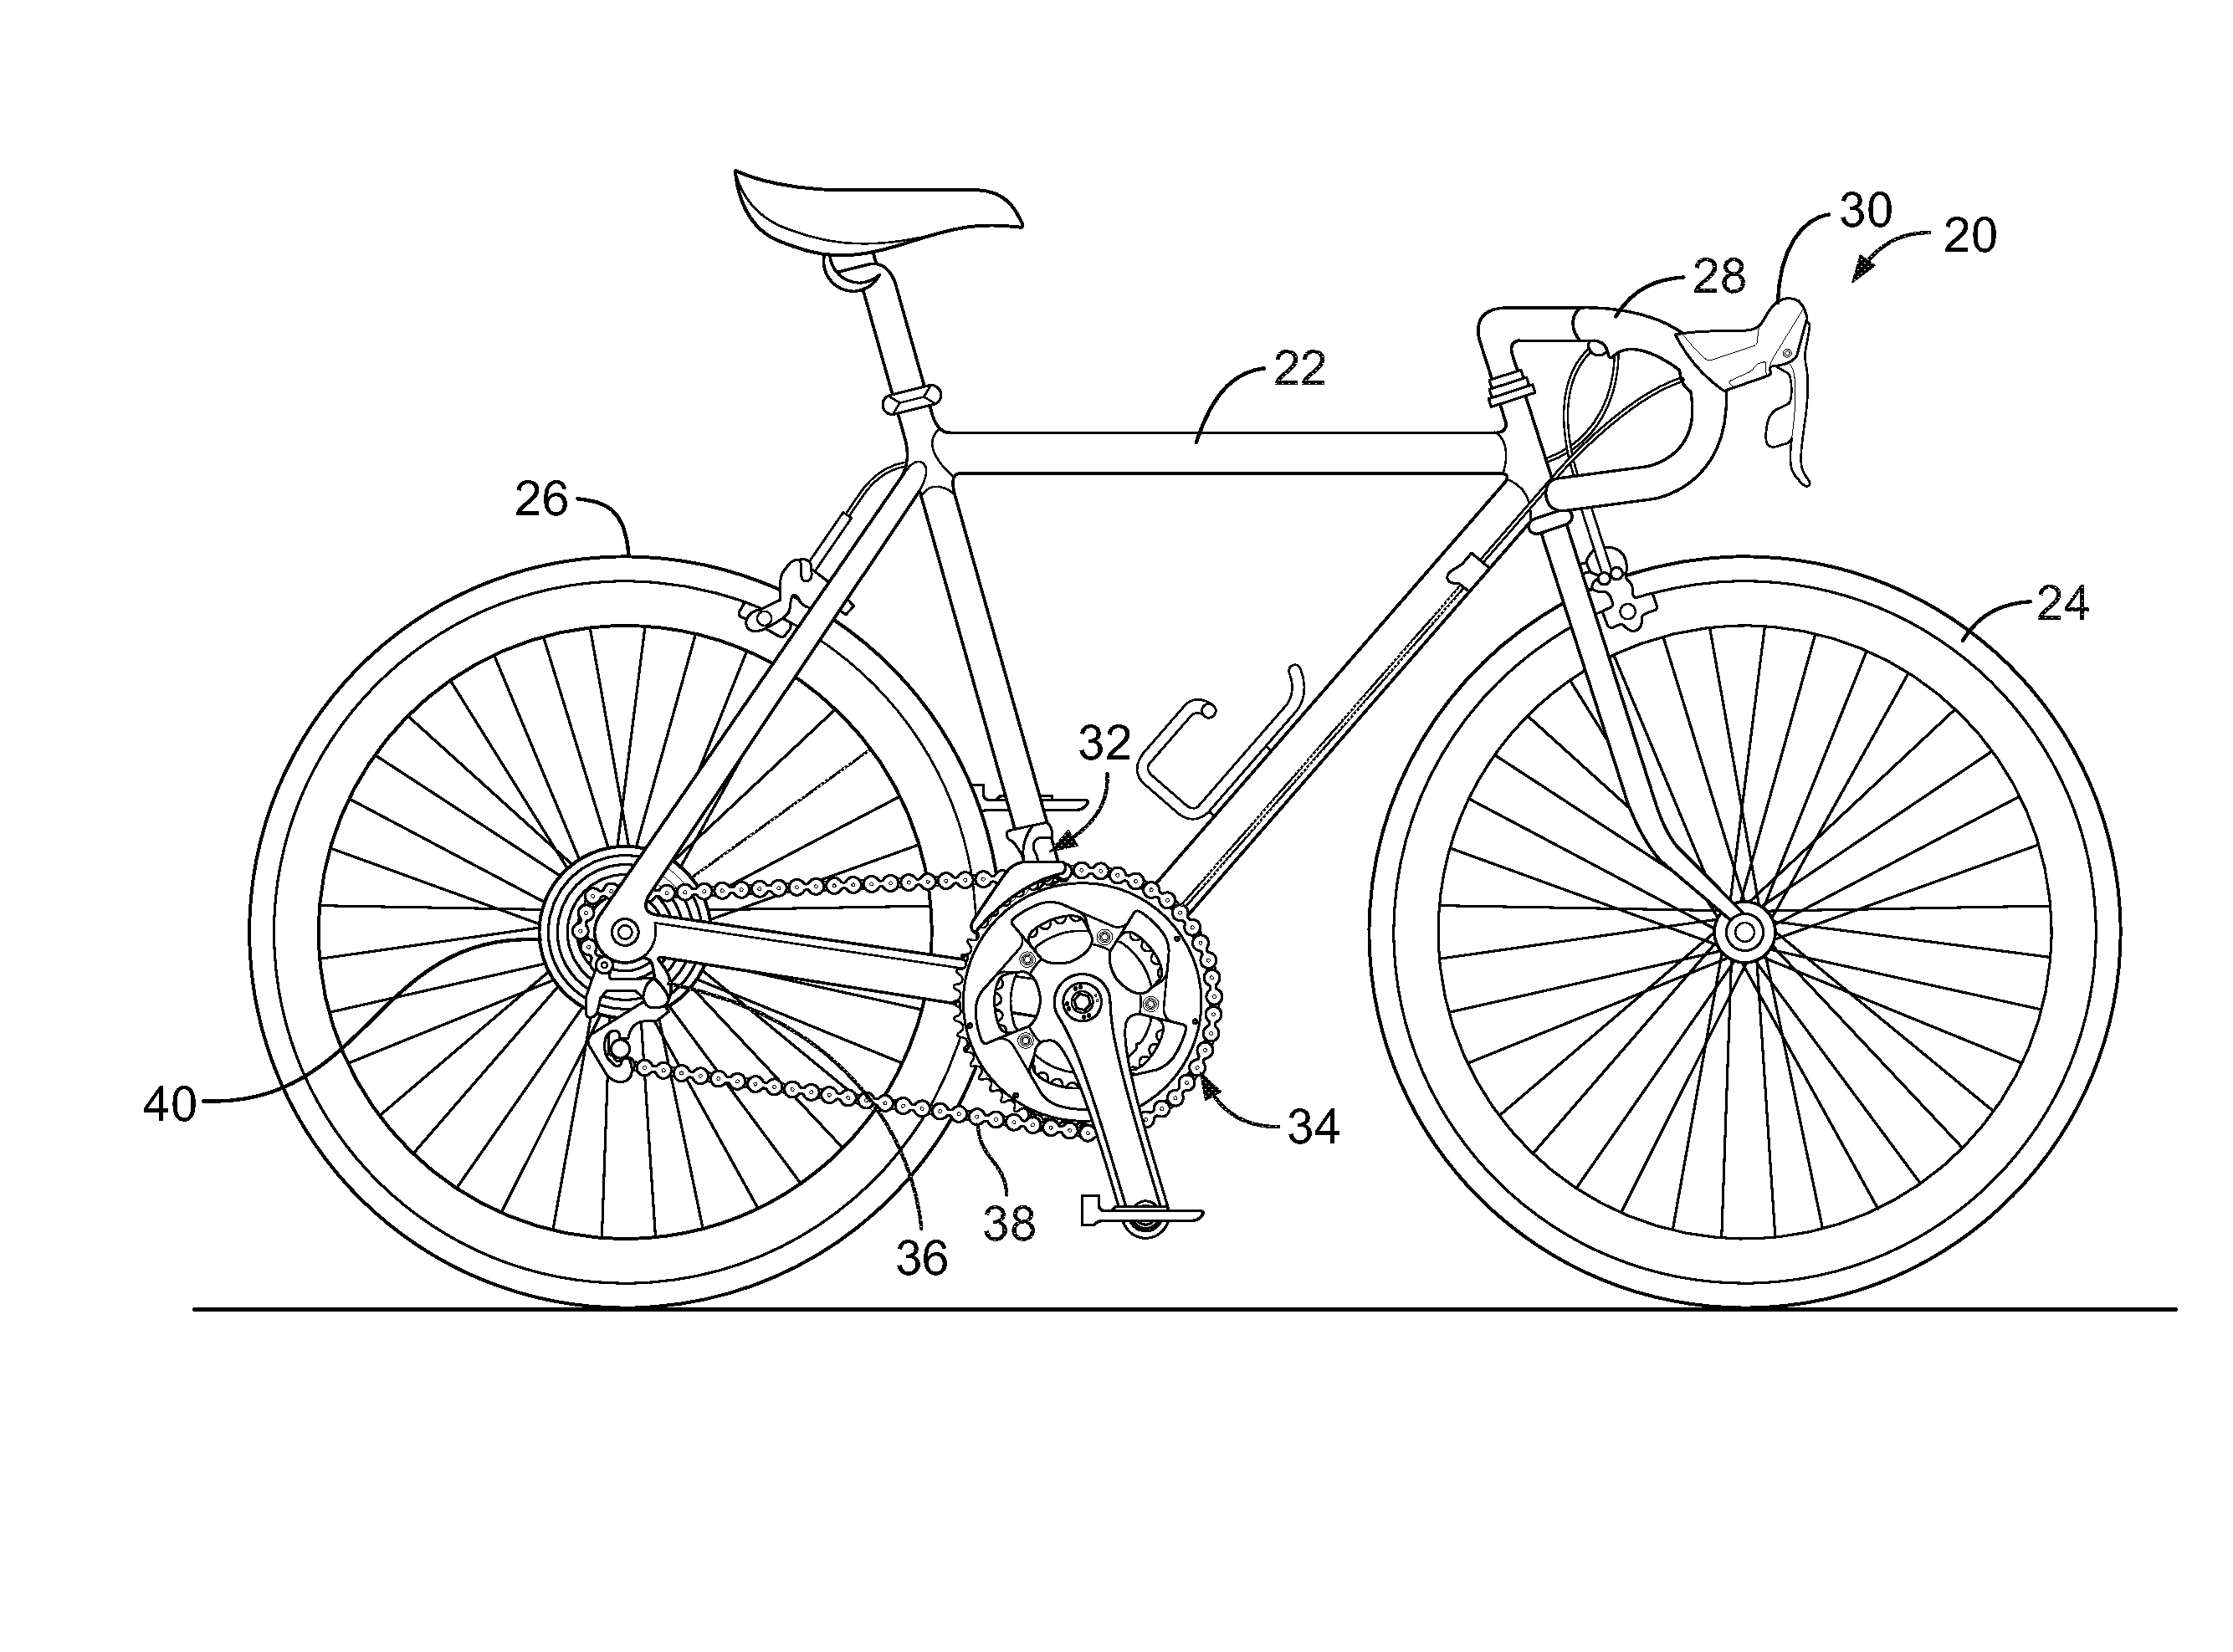 Control device for bicycle and methods